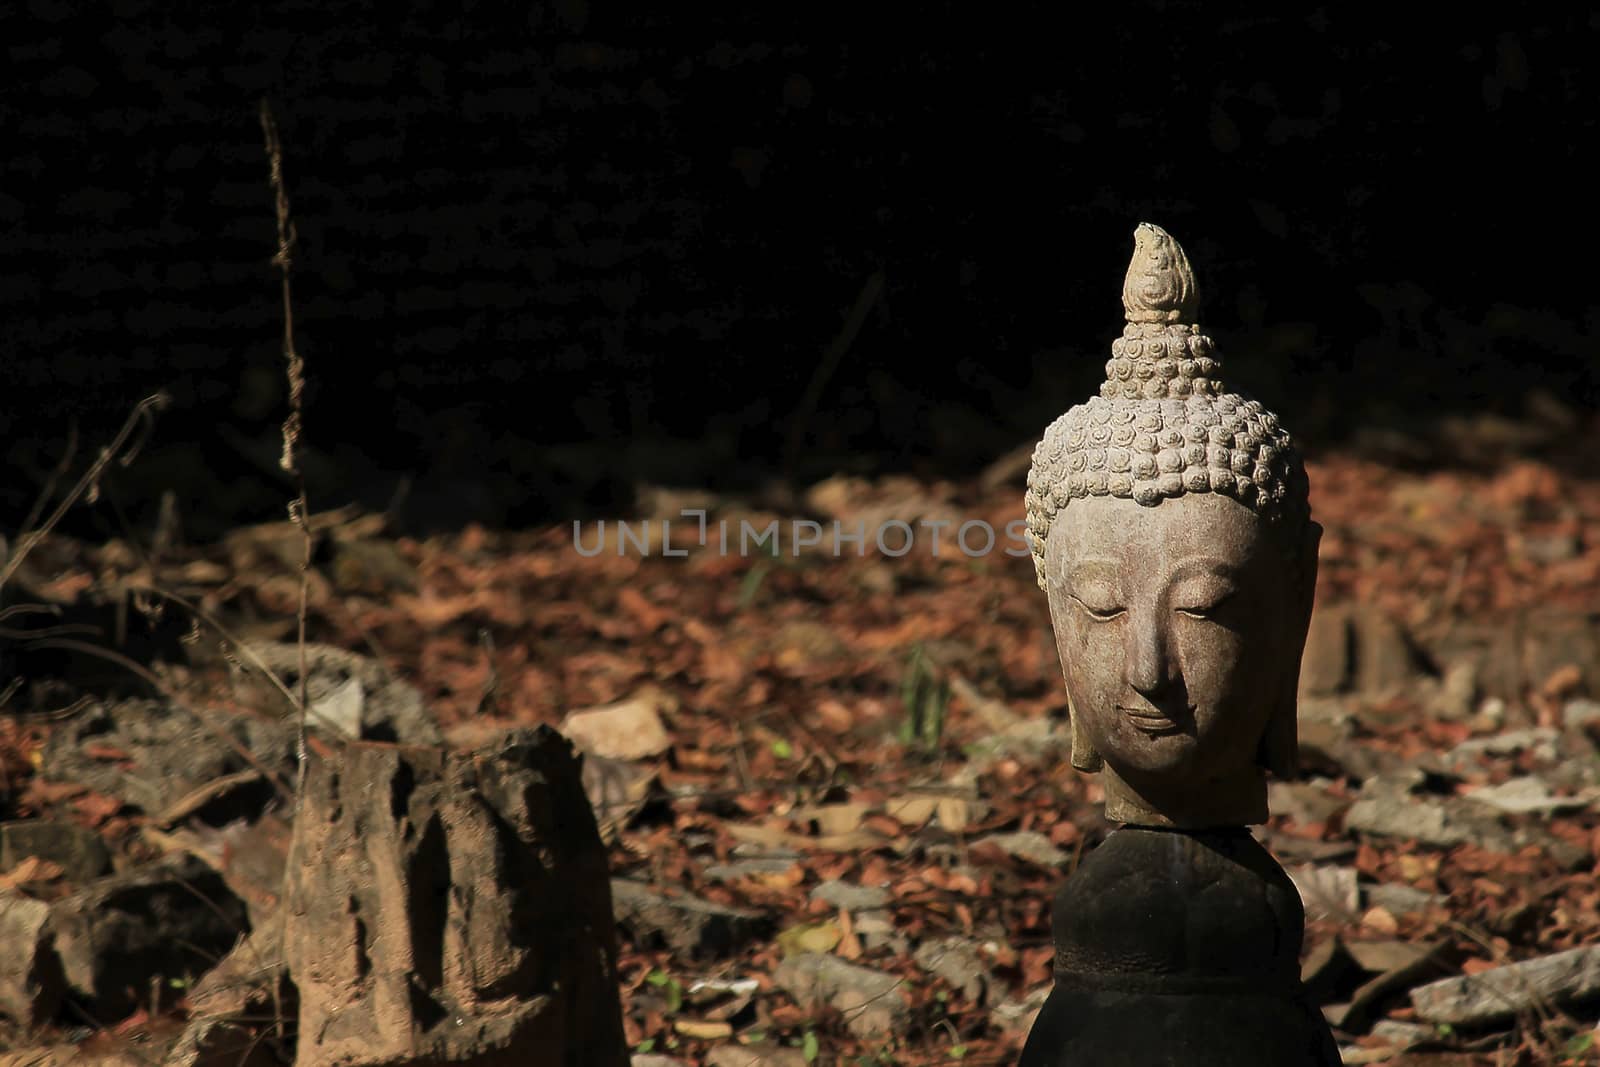 The Buddha head is set on a stone. Caused by damage